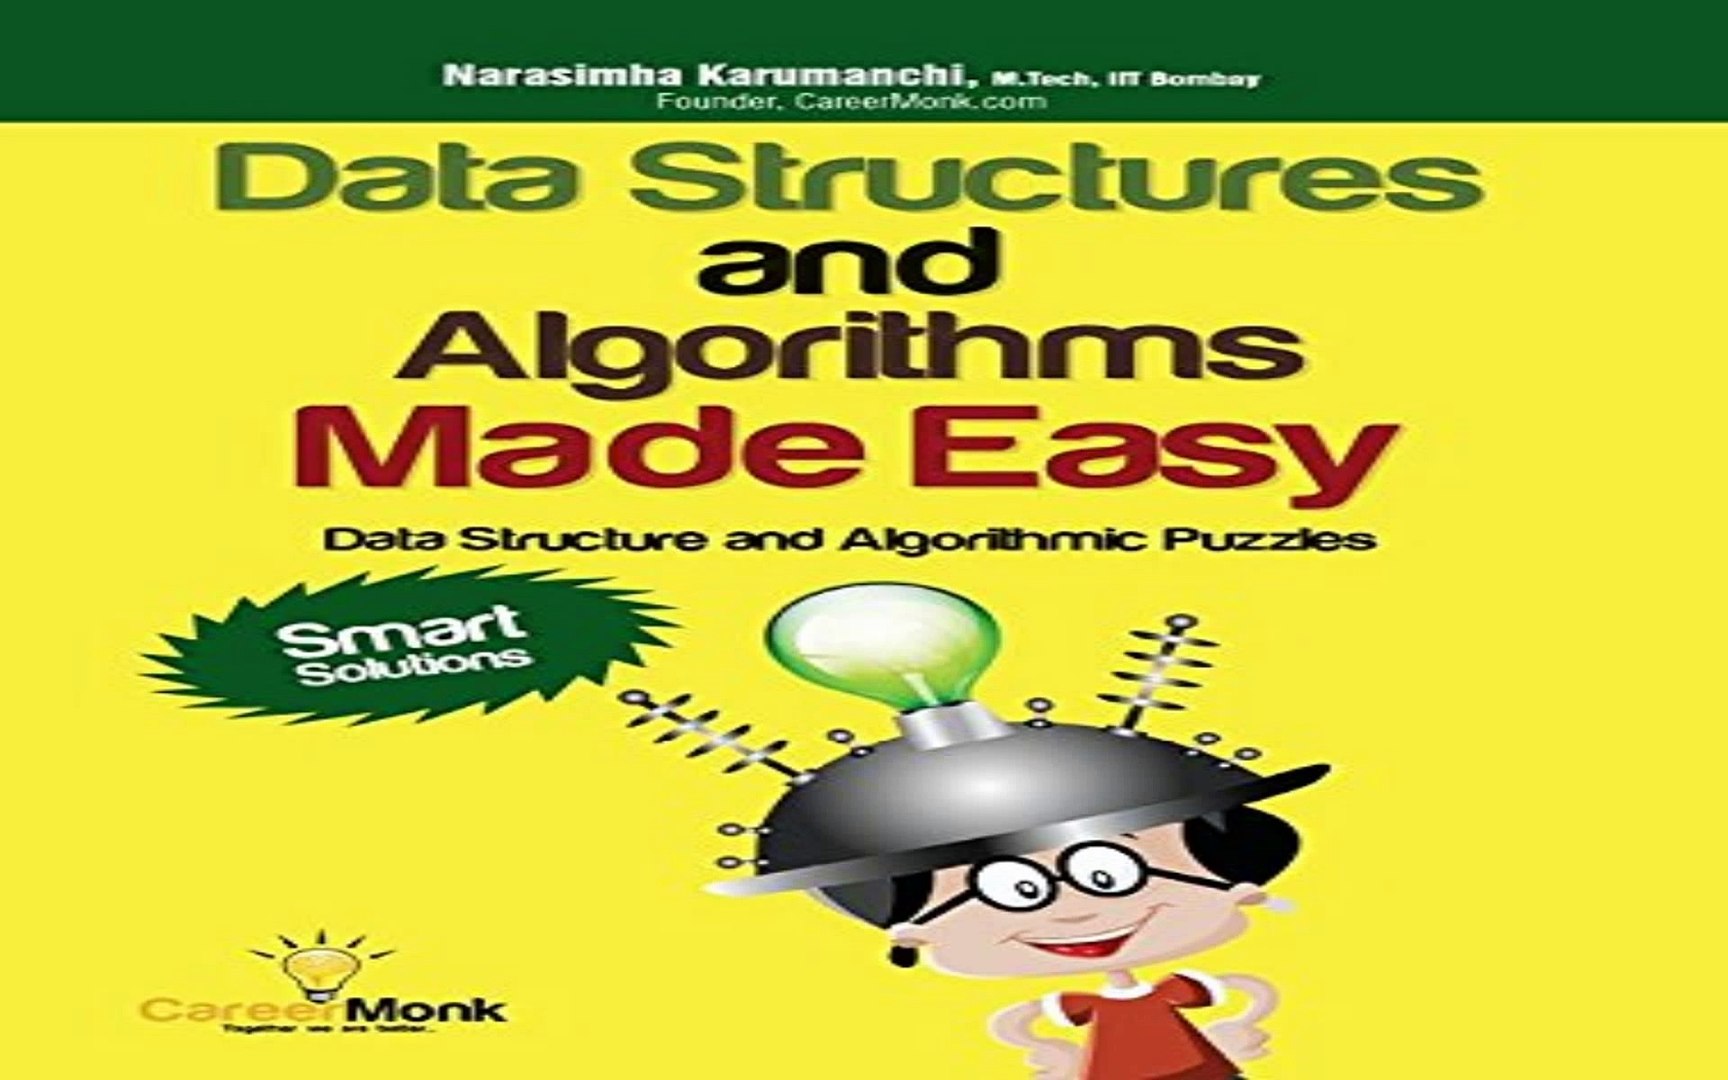 Read Data Structures and Algorithms Made Easy: Data Structure and Algorithmic Puzzles, Second Editio